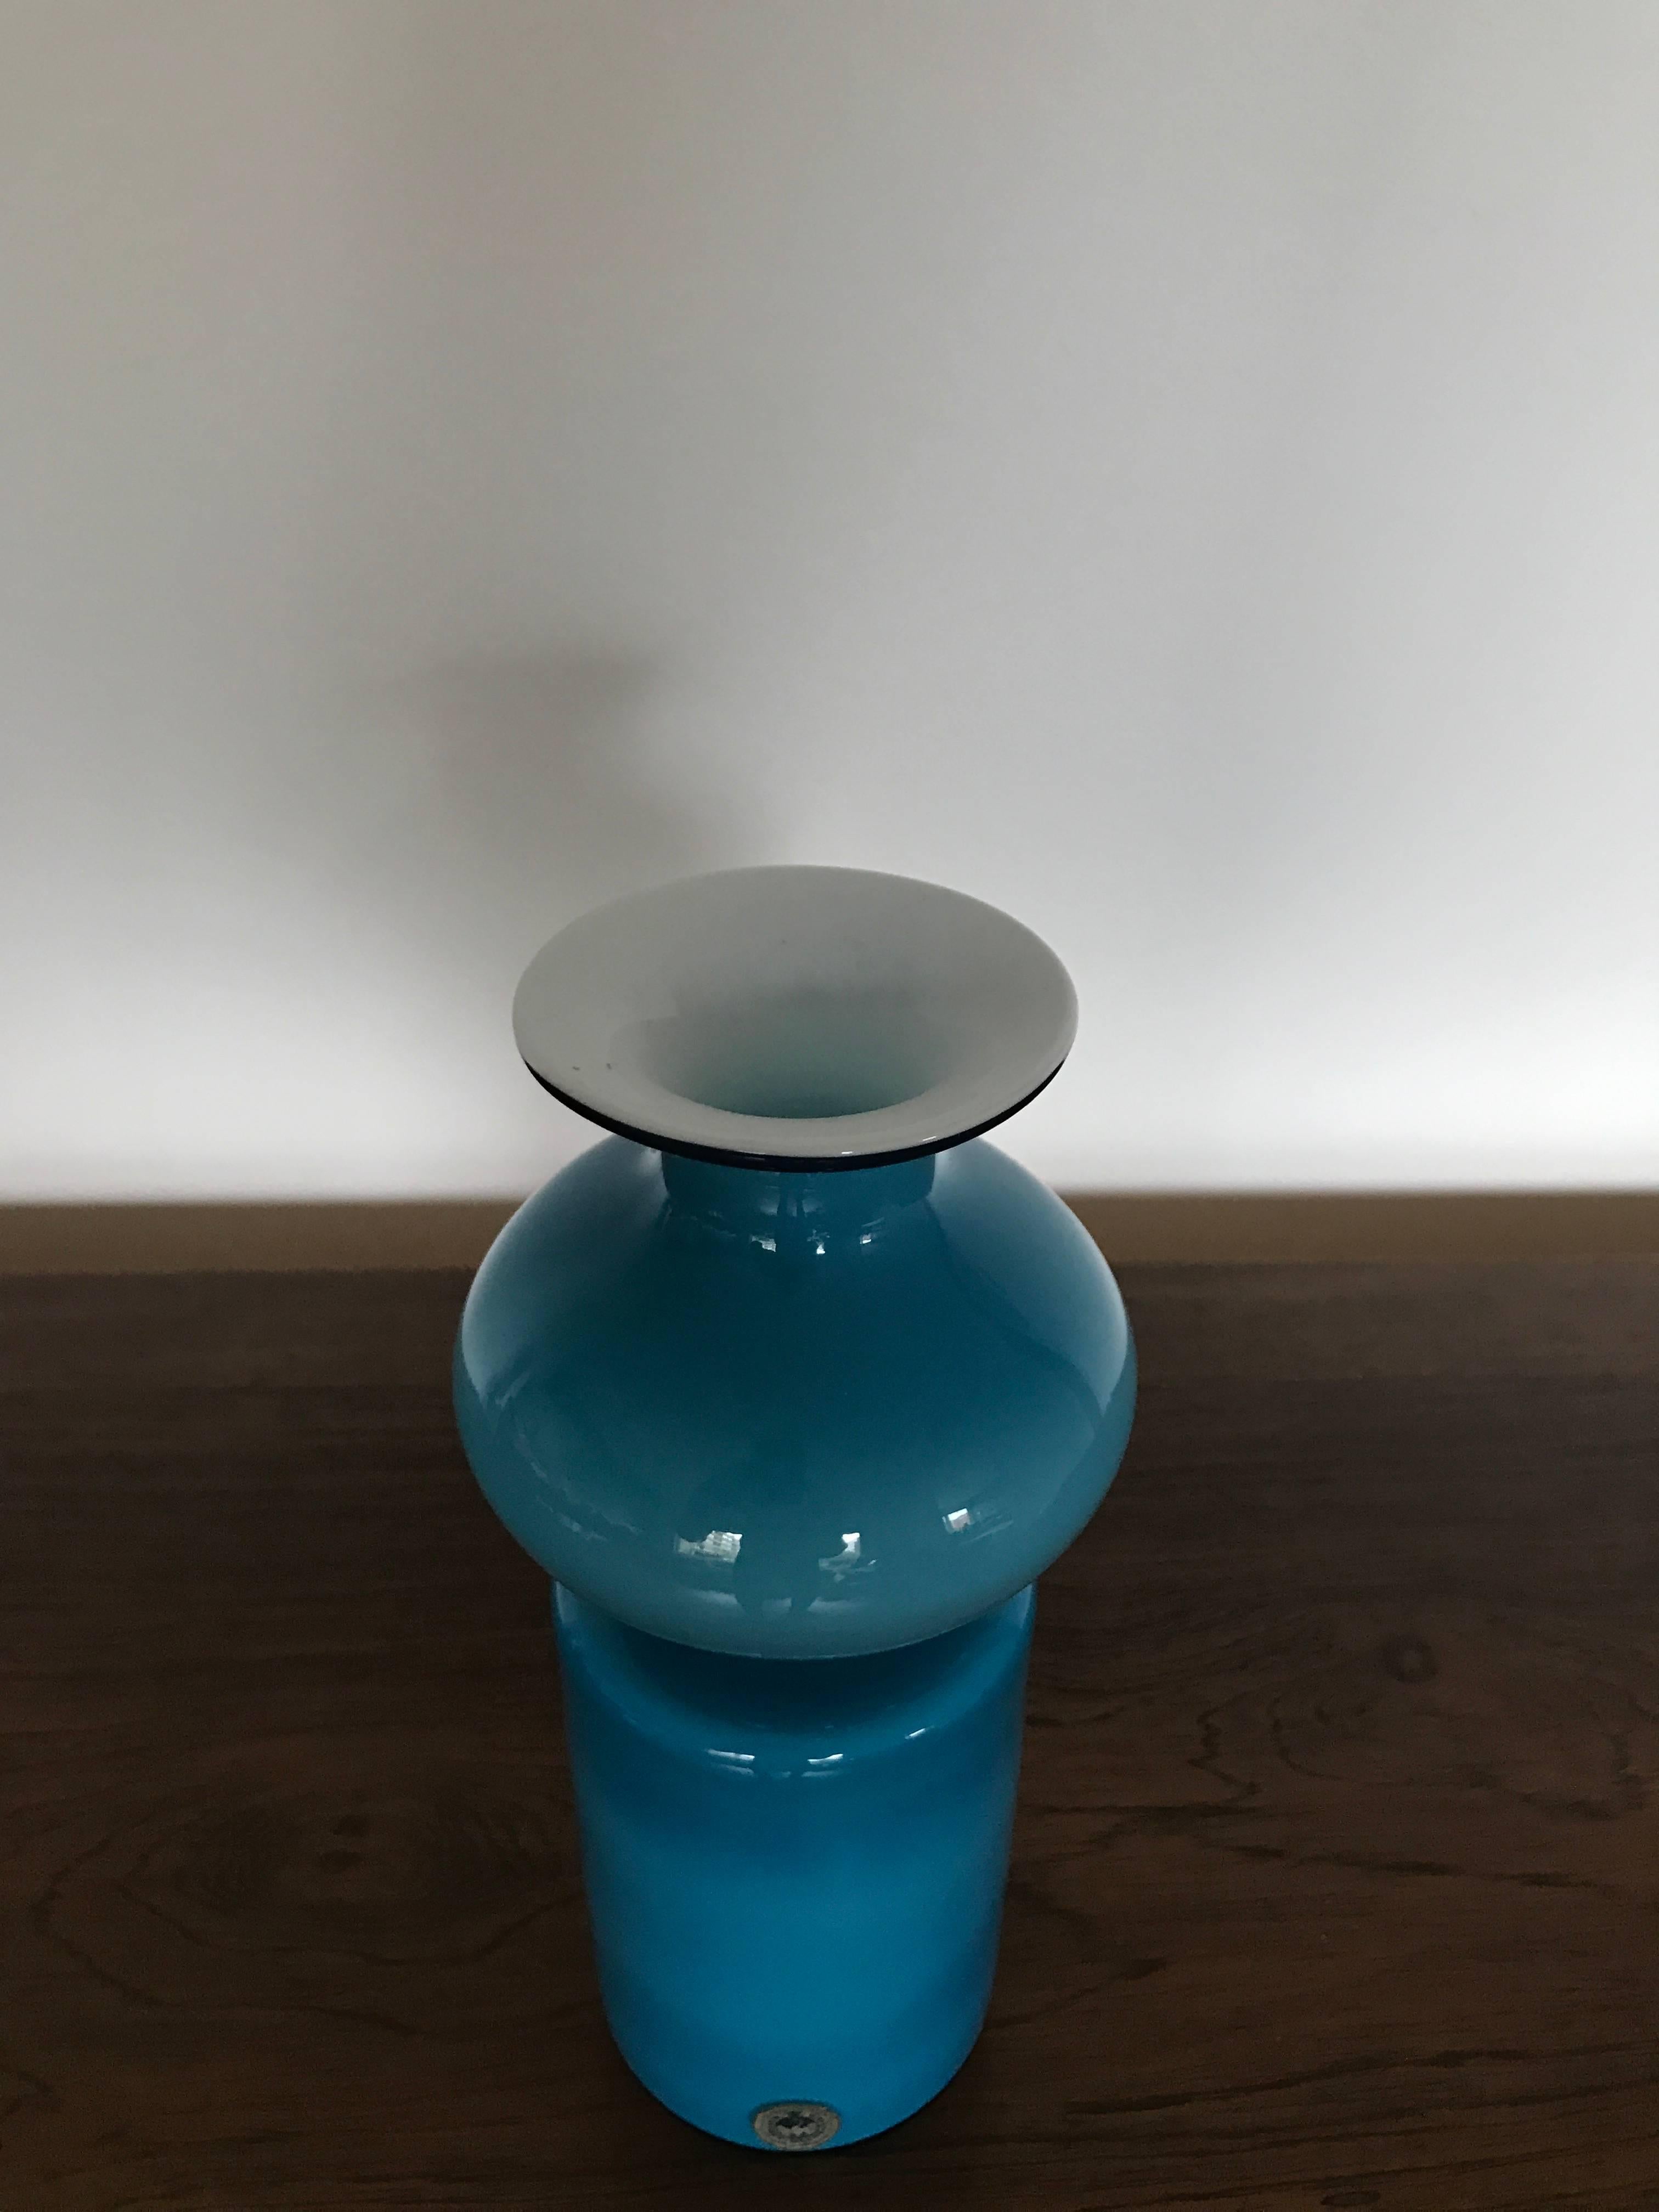 Blue glass vase from Holmegaard in Denmark, 1960s, designed by Michael Bang, measure: Diameter 6 cm and height 23 cm. Very good condition.